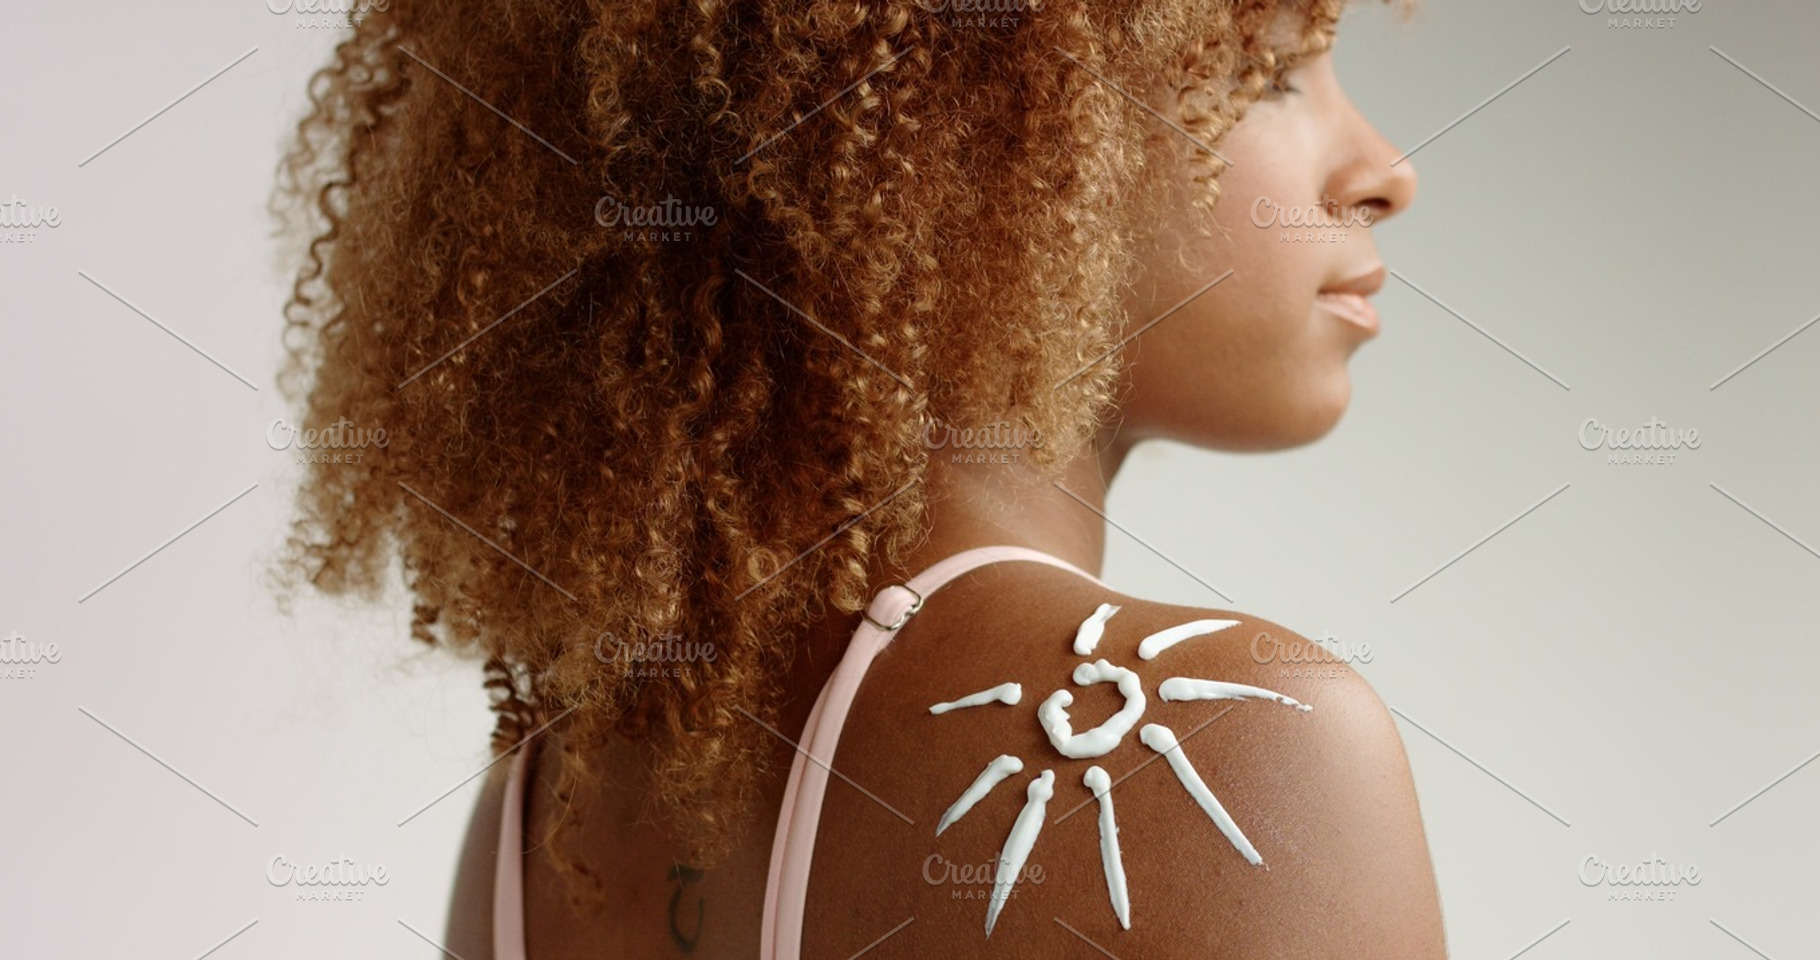 Mixed Race Black Woman With Blonde Curly Hair In Studio With Cream